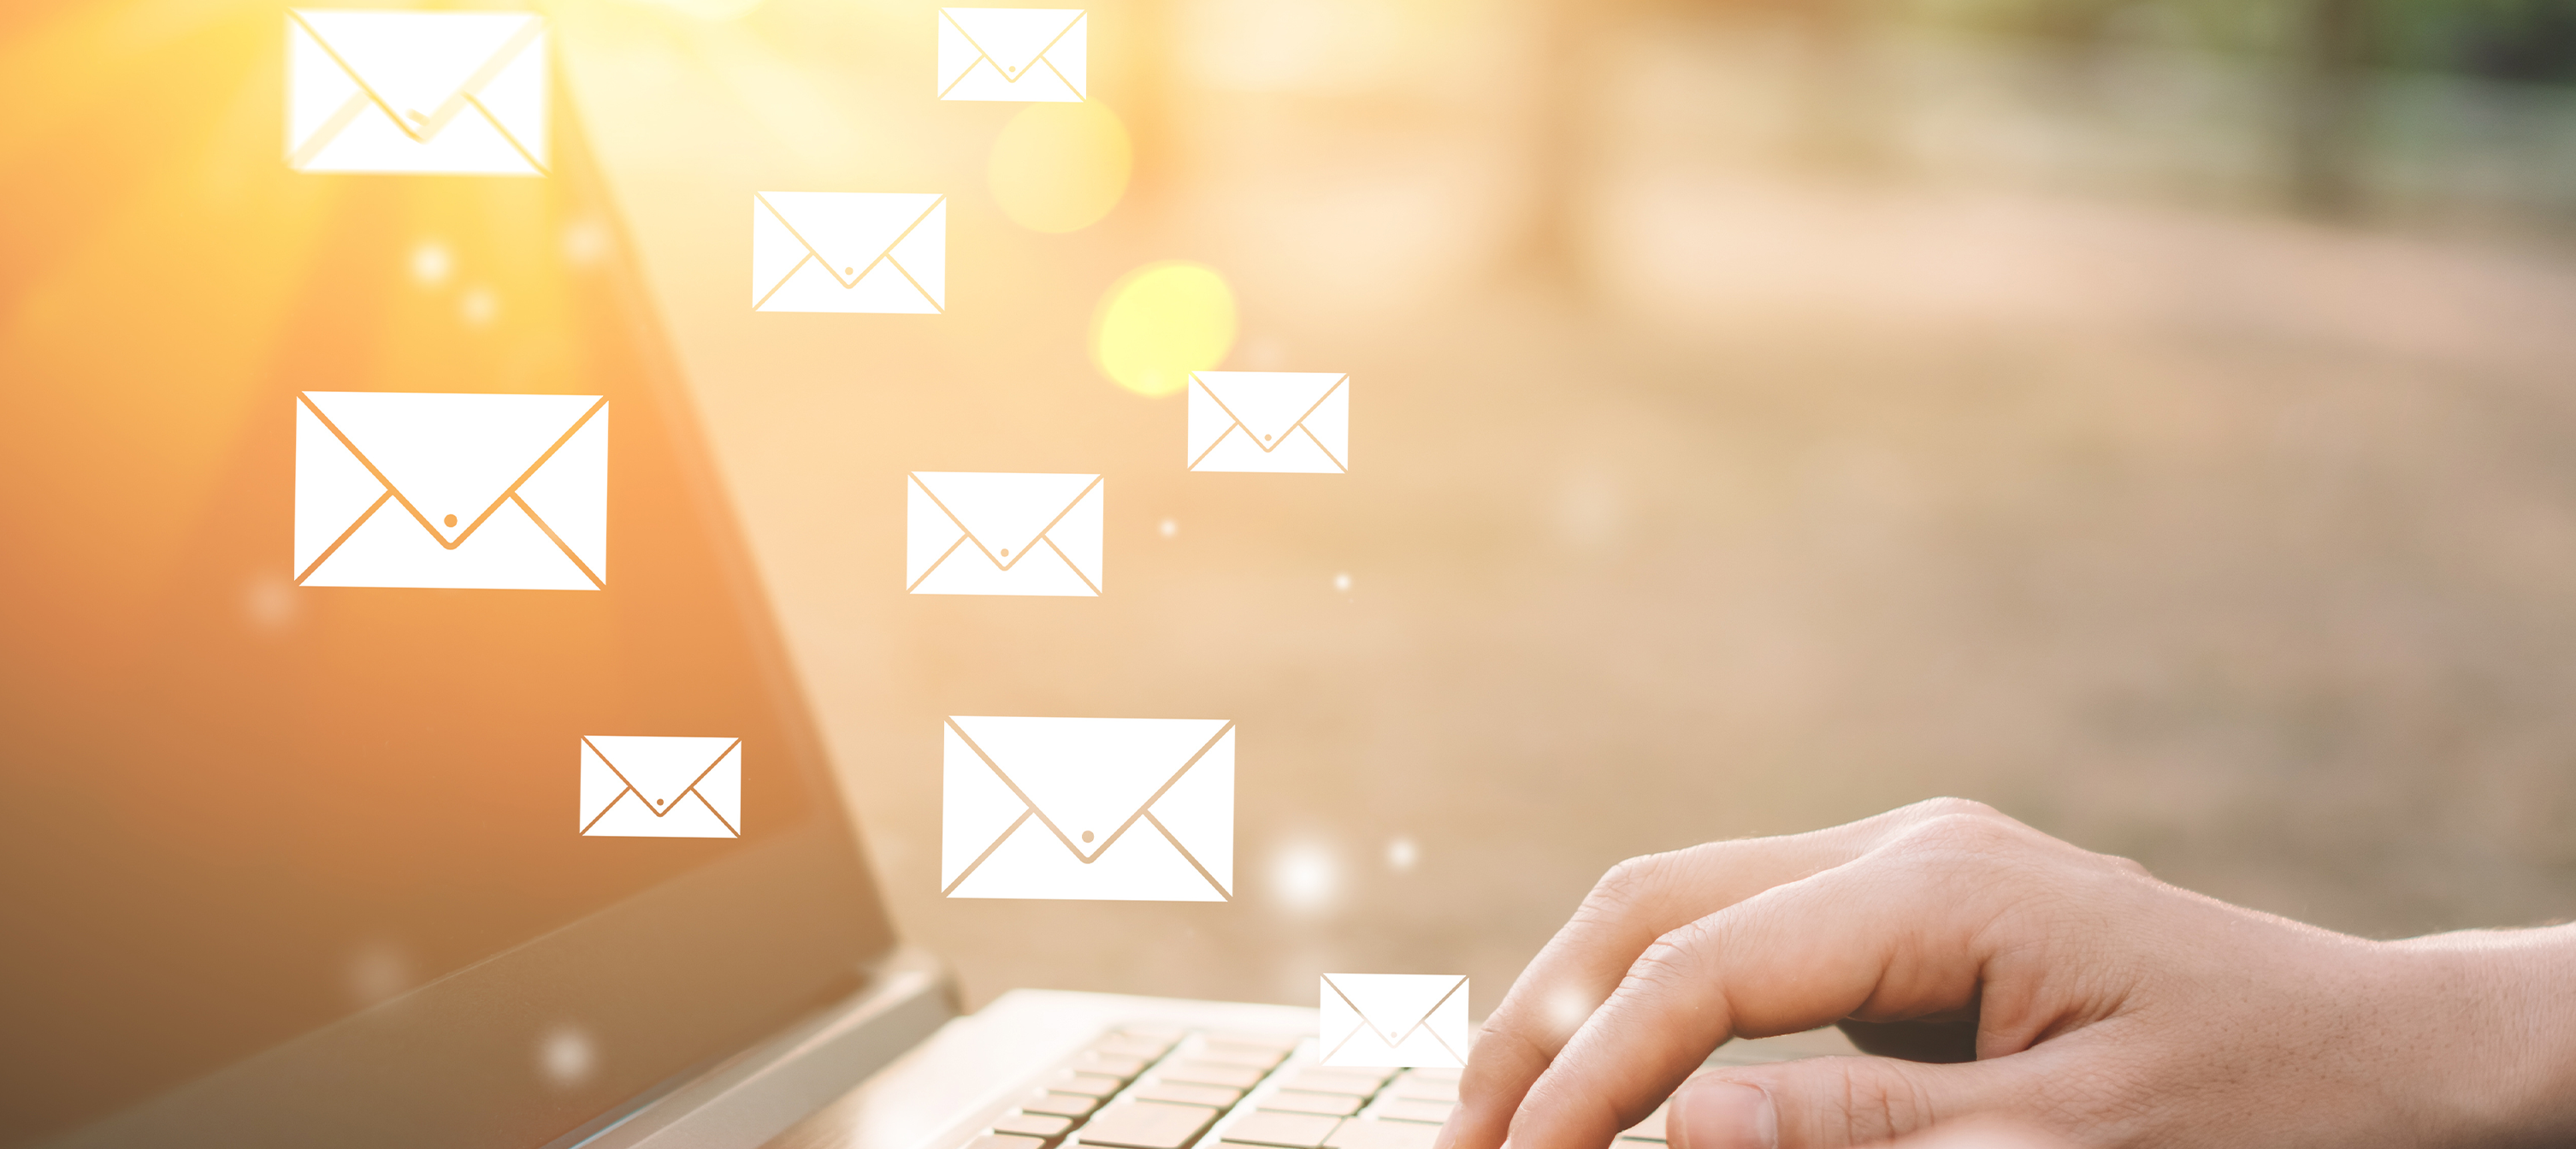 5 Email Marketing Best Practices that Actually Work